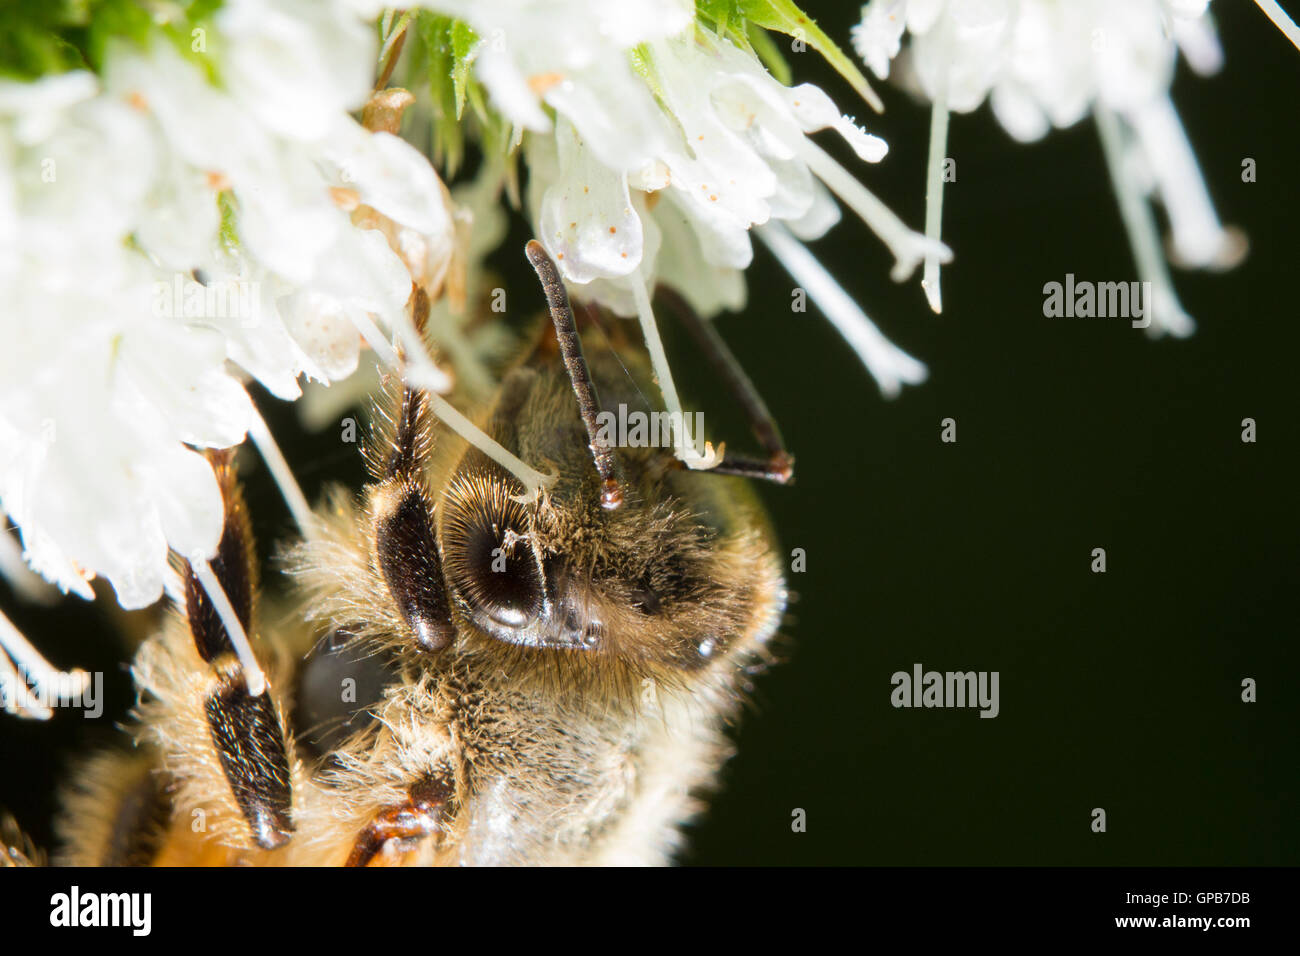 Honey Bee (Apis mellifera) collecting nectar and pollen on Mentha sachalinensis is known by the common name of garden mint Stock Photo